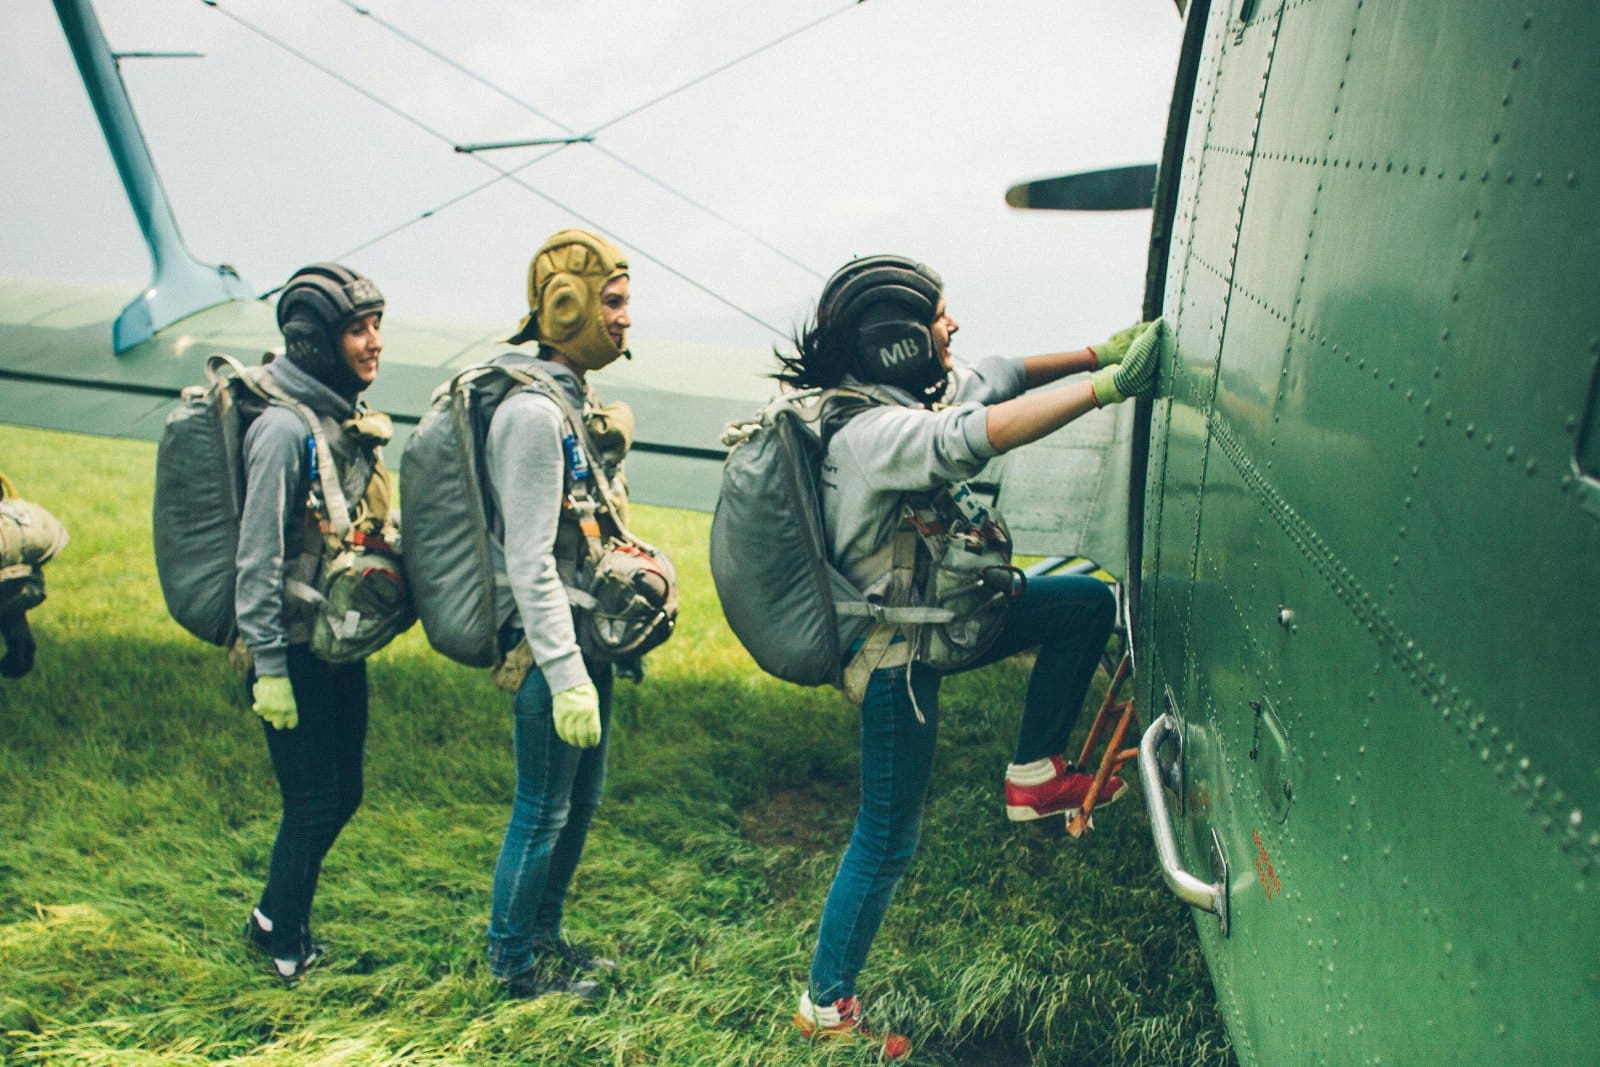 <p class="wp-caption-text">Image Credit: Pexels / Daria Klimova</p>  <p>Step out of your comfort zones and embrace new experiences as a group. Whether it’s sampling local cuisine, attempting adrenaline-pumping activities, or immersing yourselves in cultural traditions, shared adventures strengthen bonds and create lasting memories.</p>